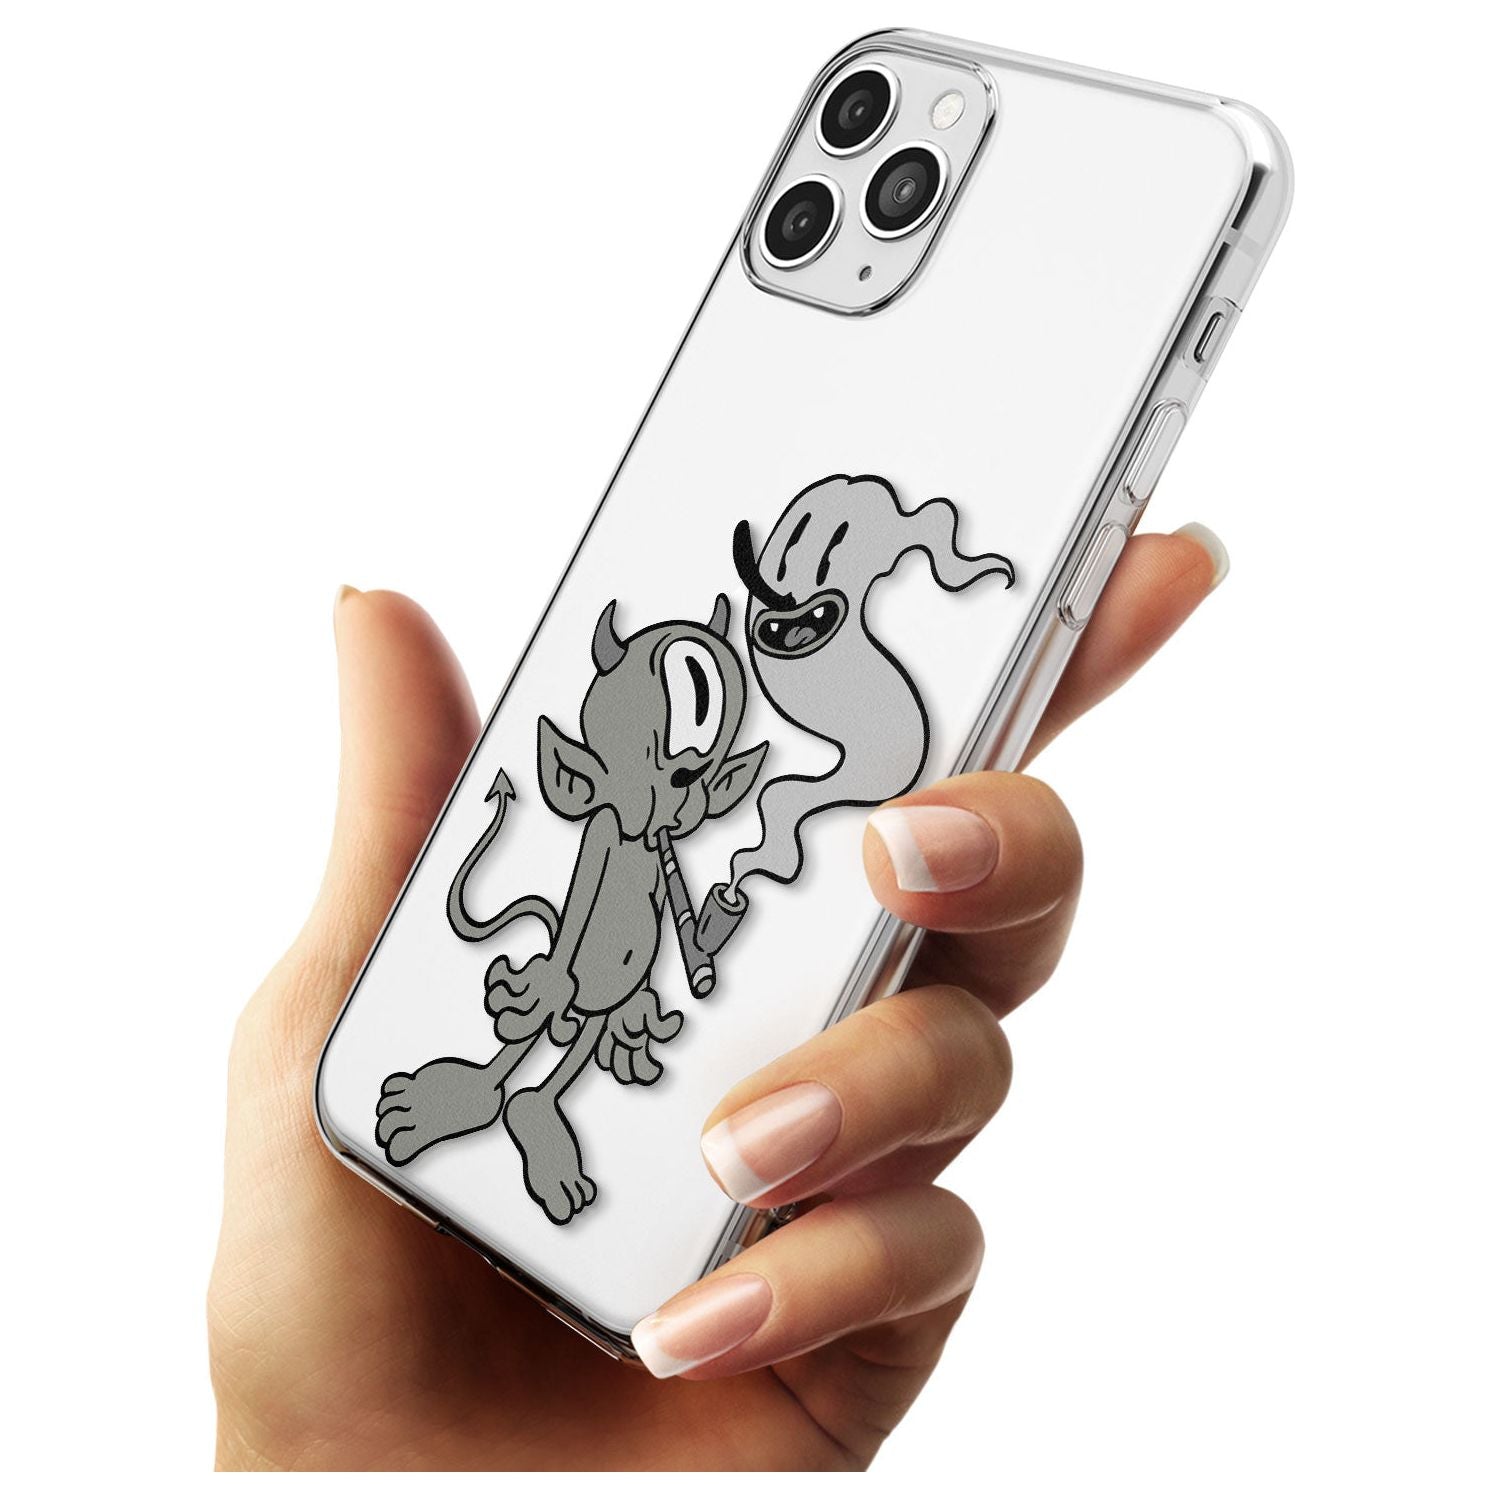 Pipe Goblin Slim TPU Phone Case for iPhone 11 Pro Max